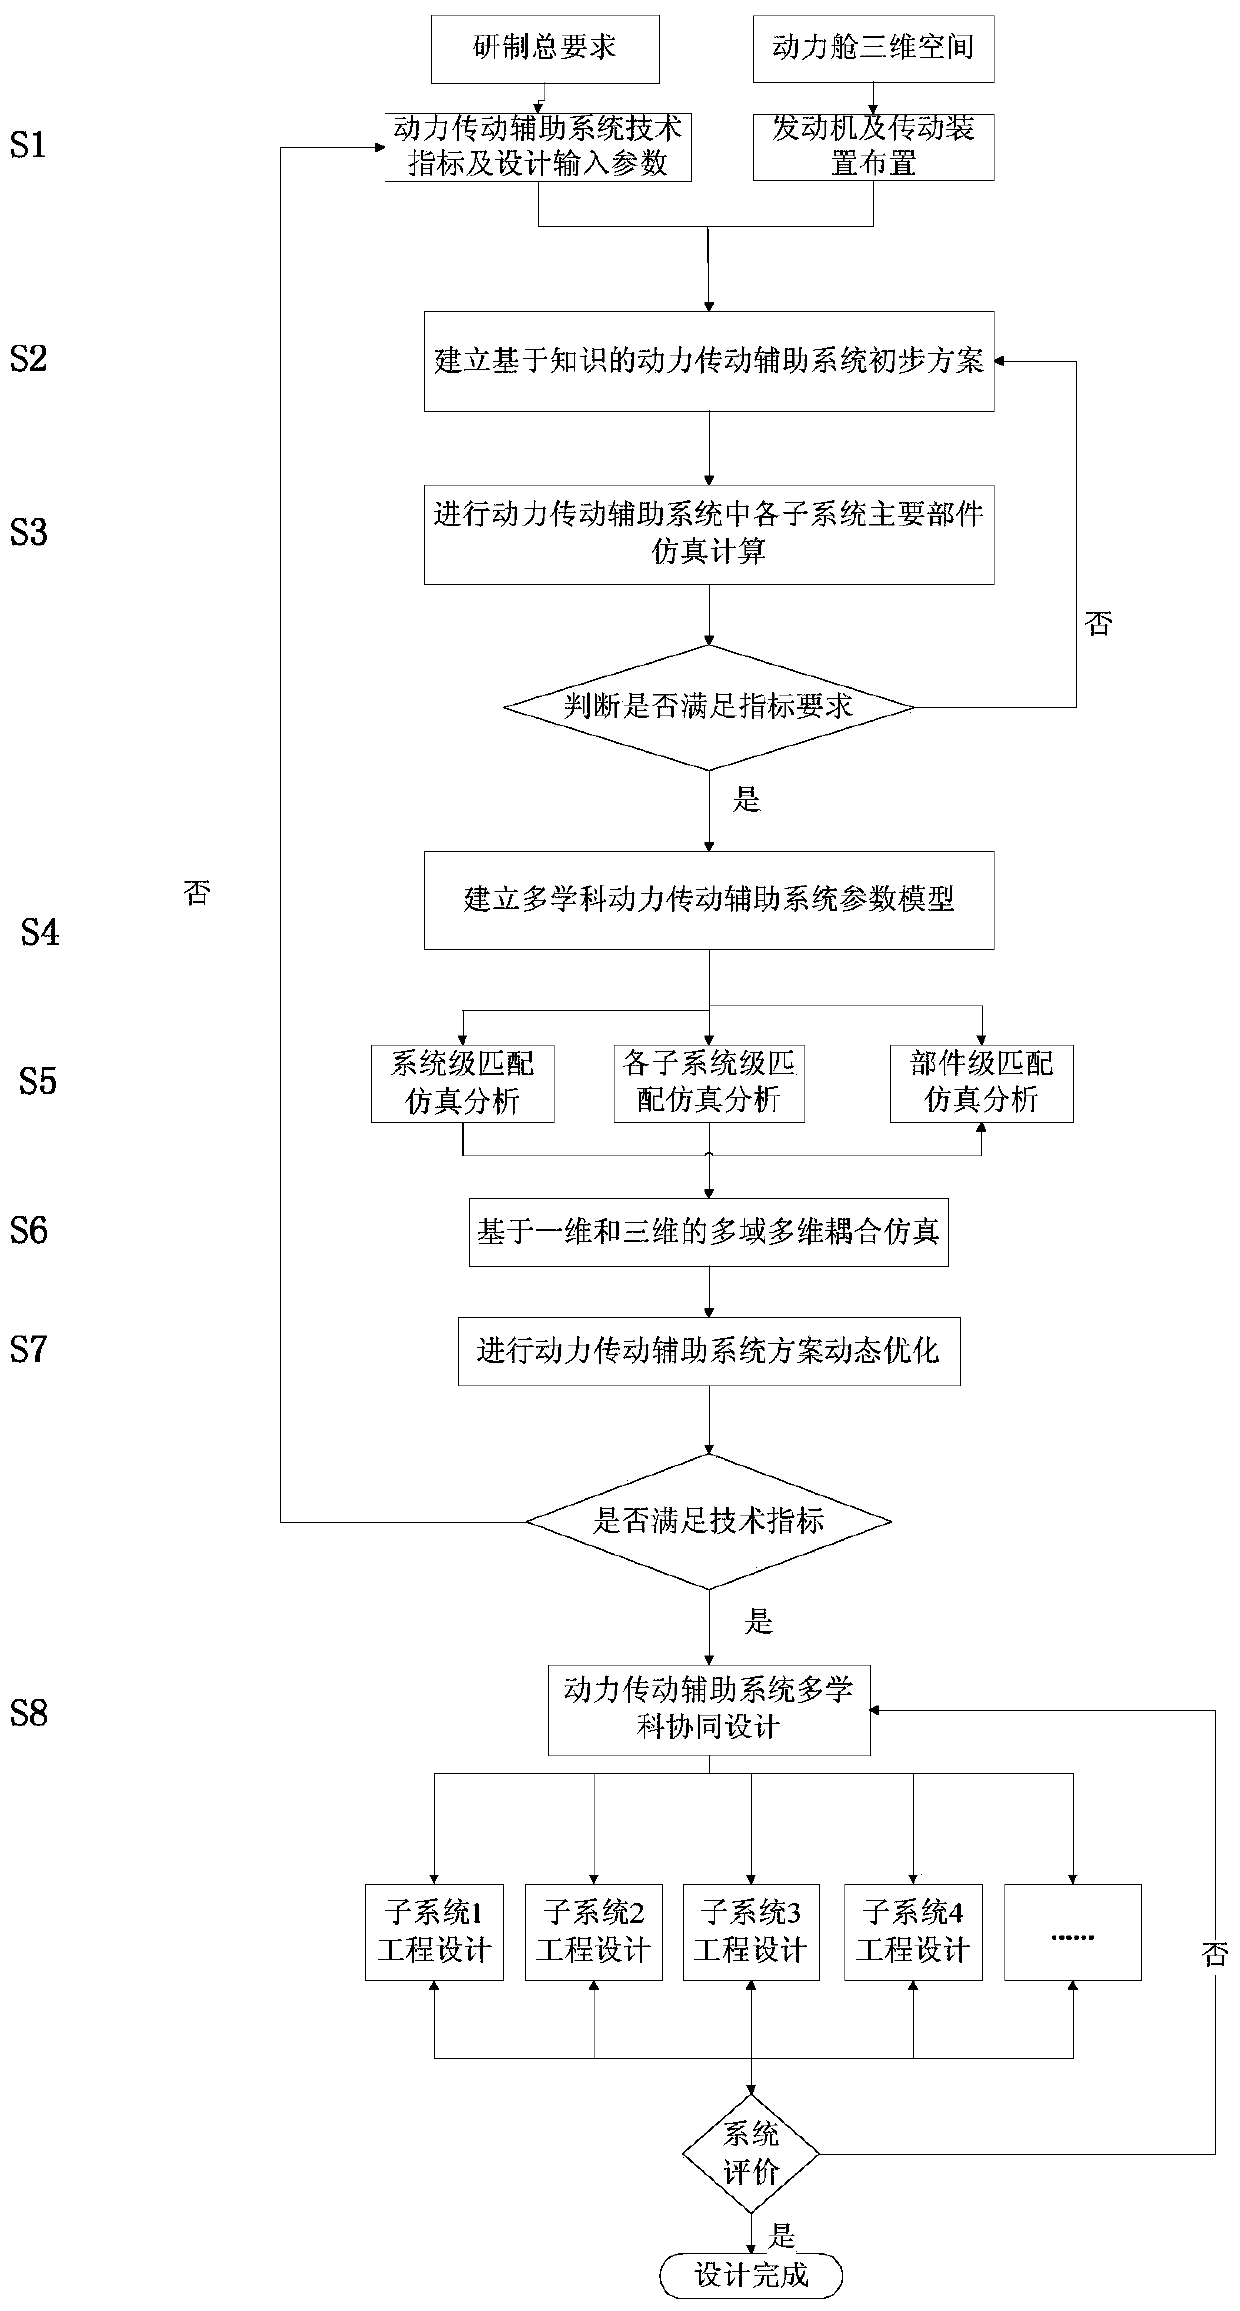 Design method of top-down power transmission auxiliary system